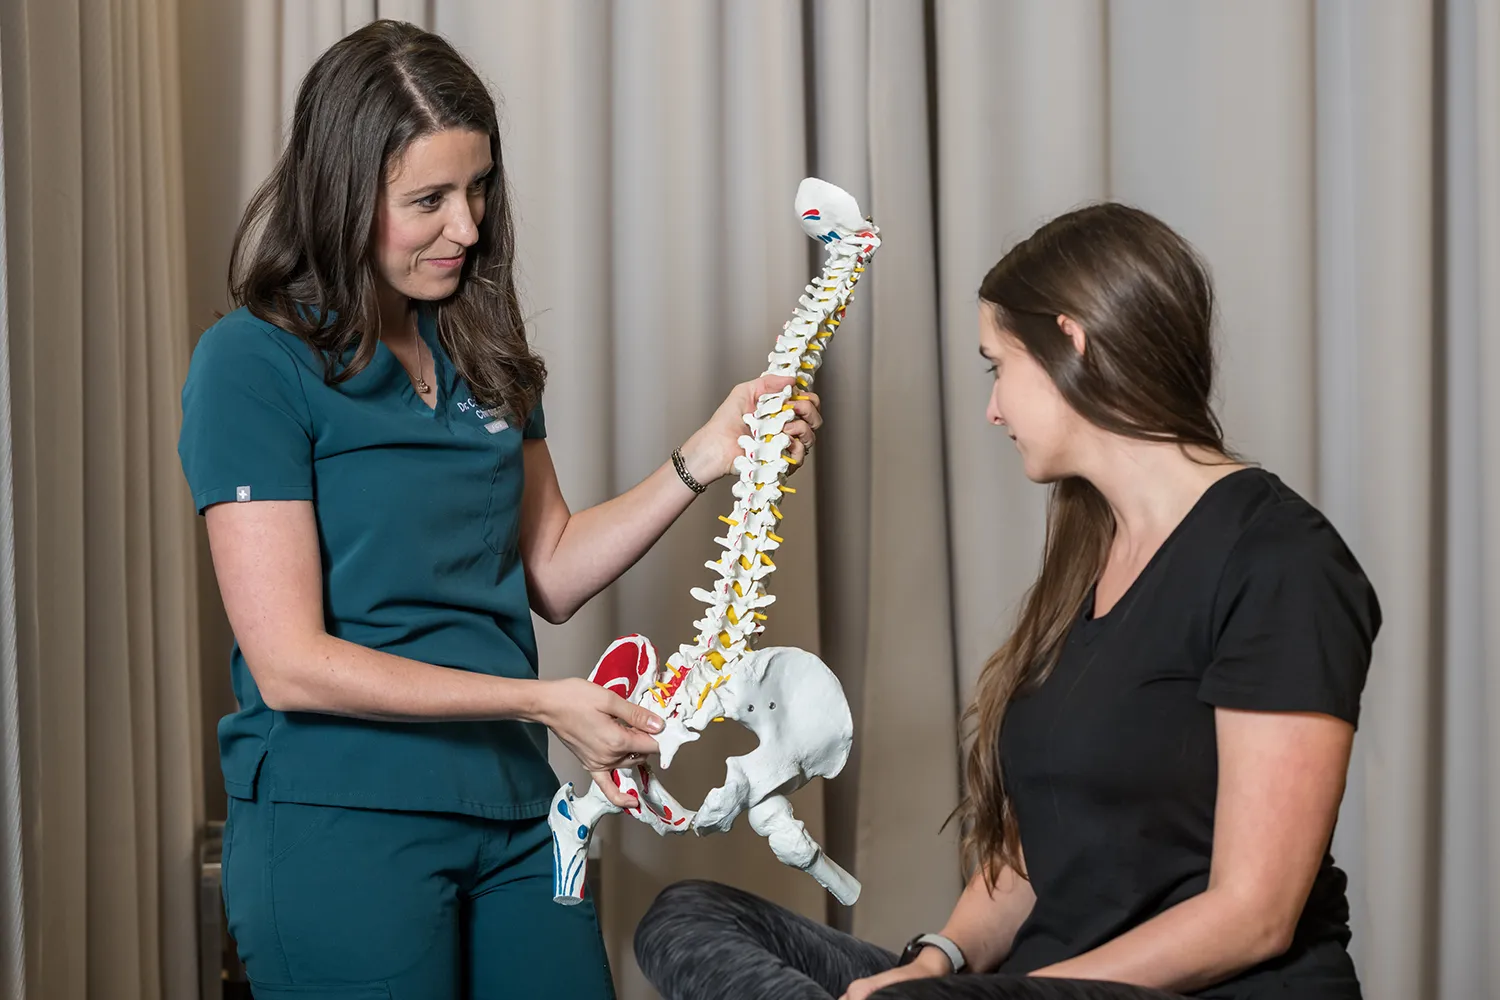 Chiropractor showing a model of a spine to a patient